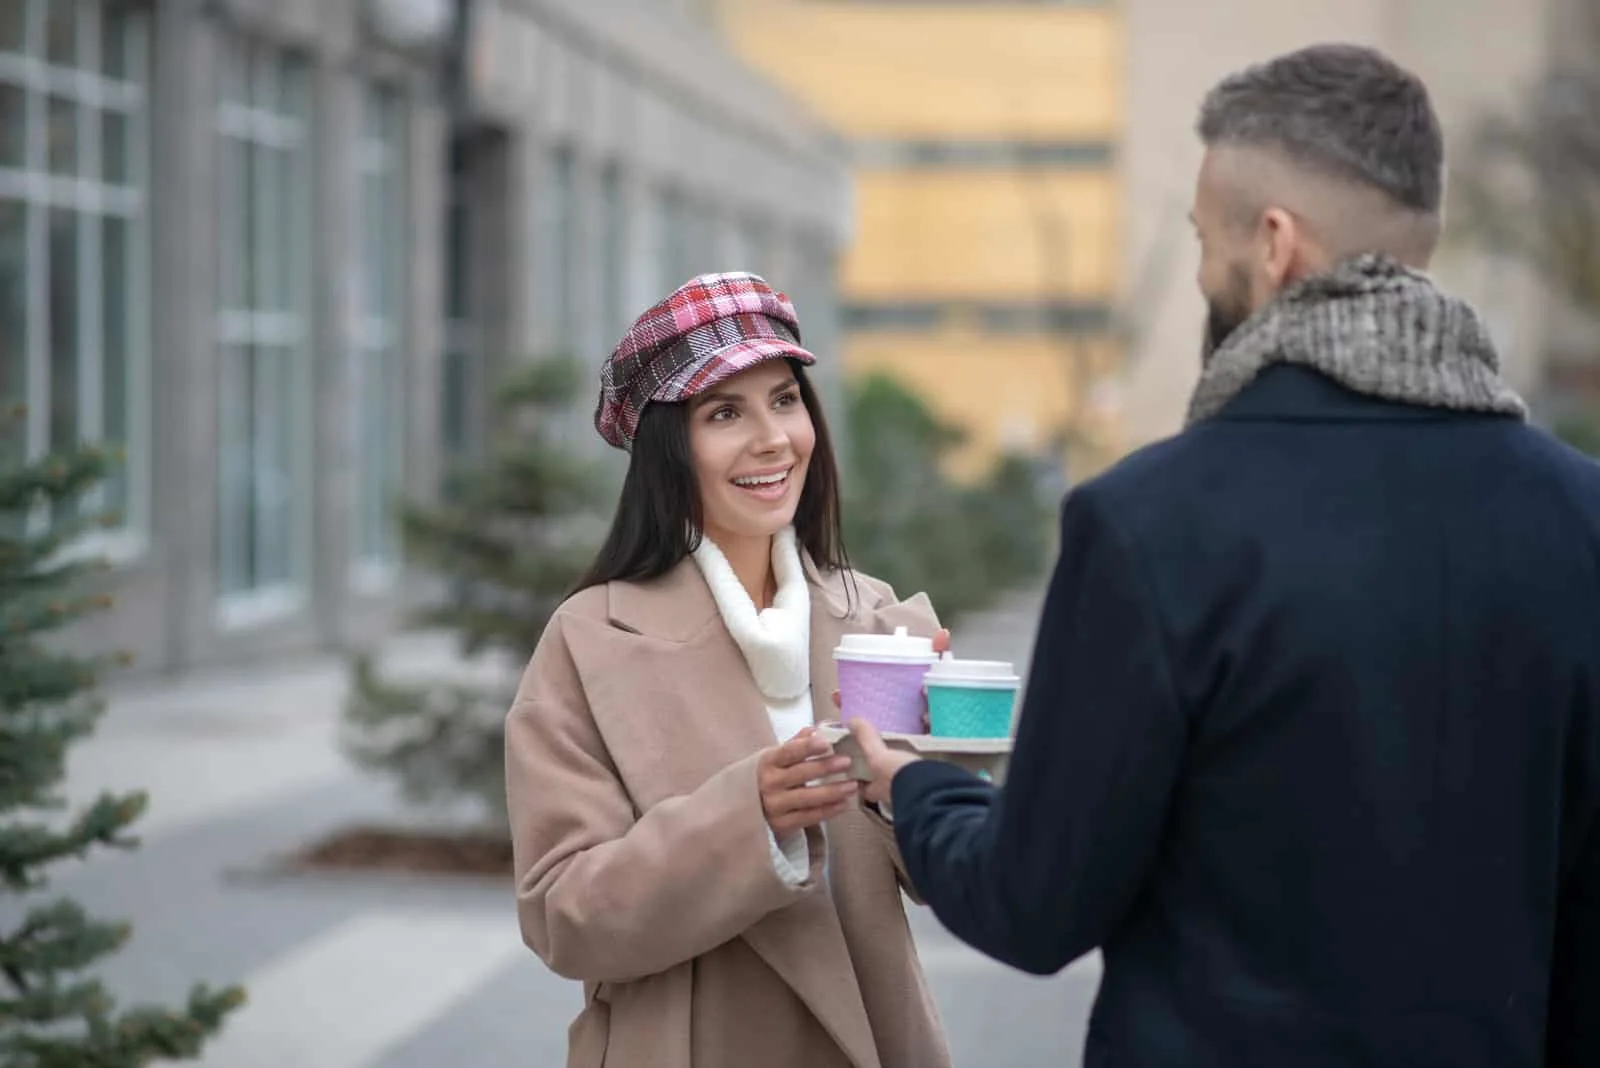 a smiling man and woman stand in the street and talk